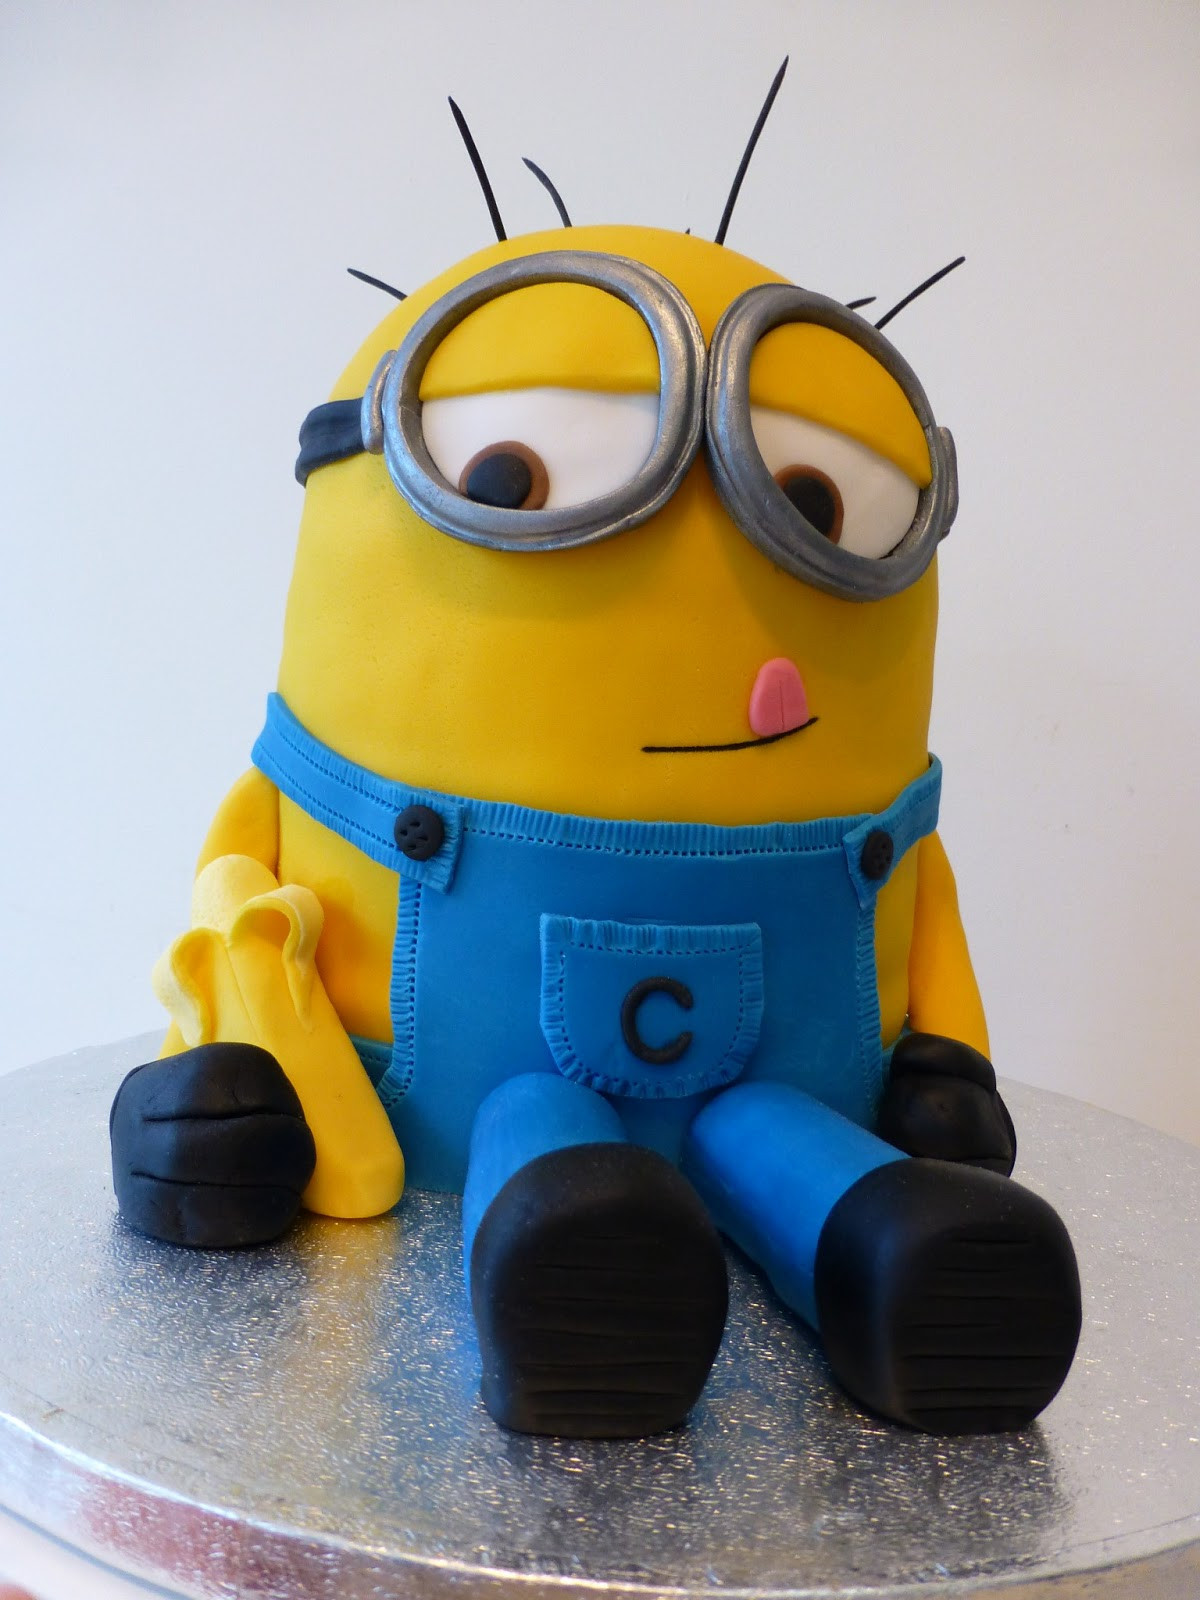 Despicable Me Birthday Cake
 What an awesome cake Despicable Me Minion Cake